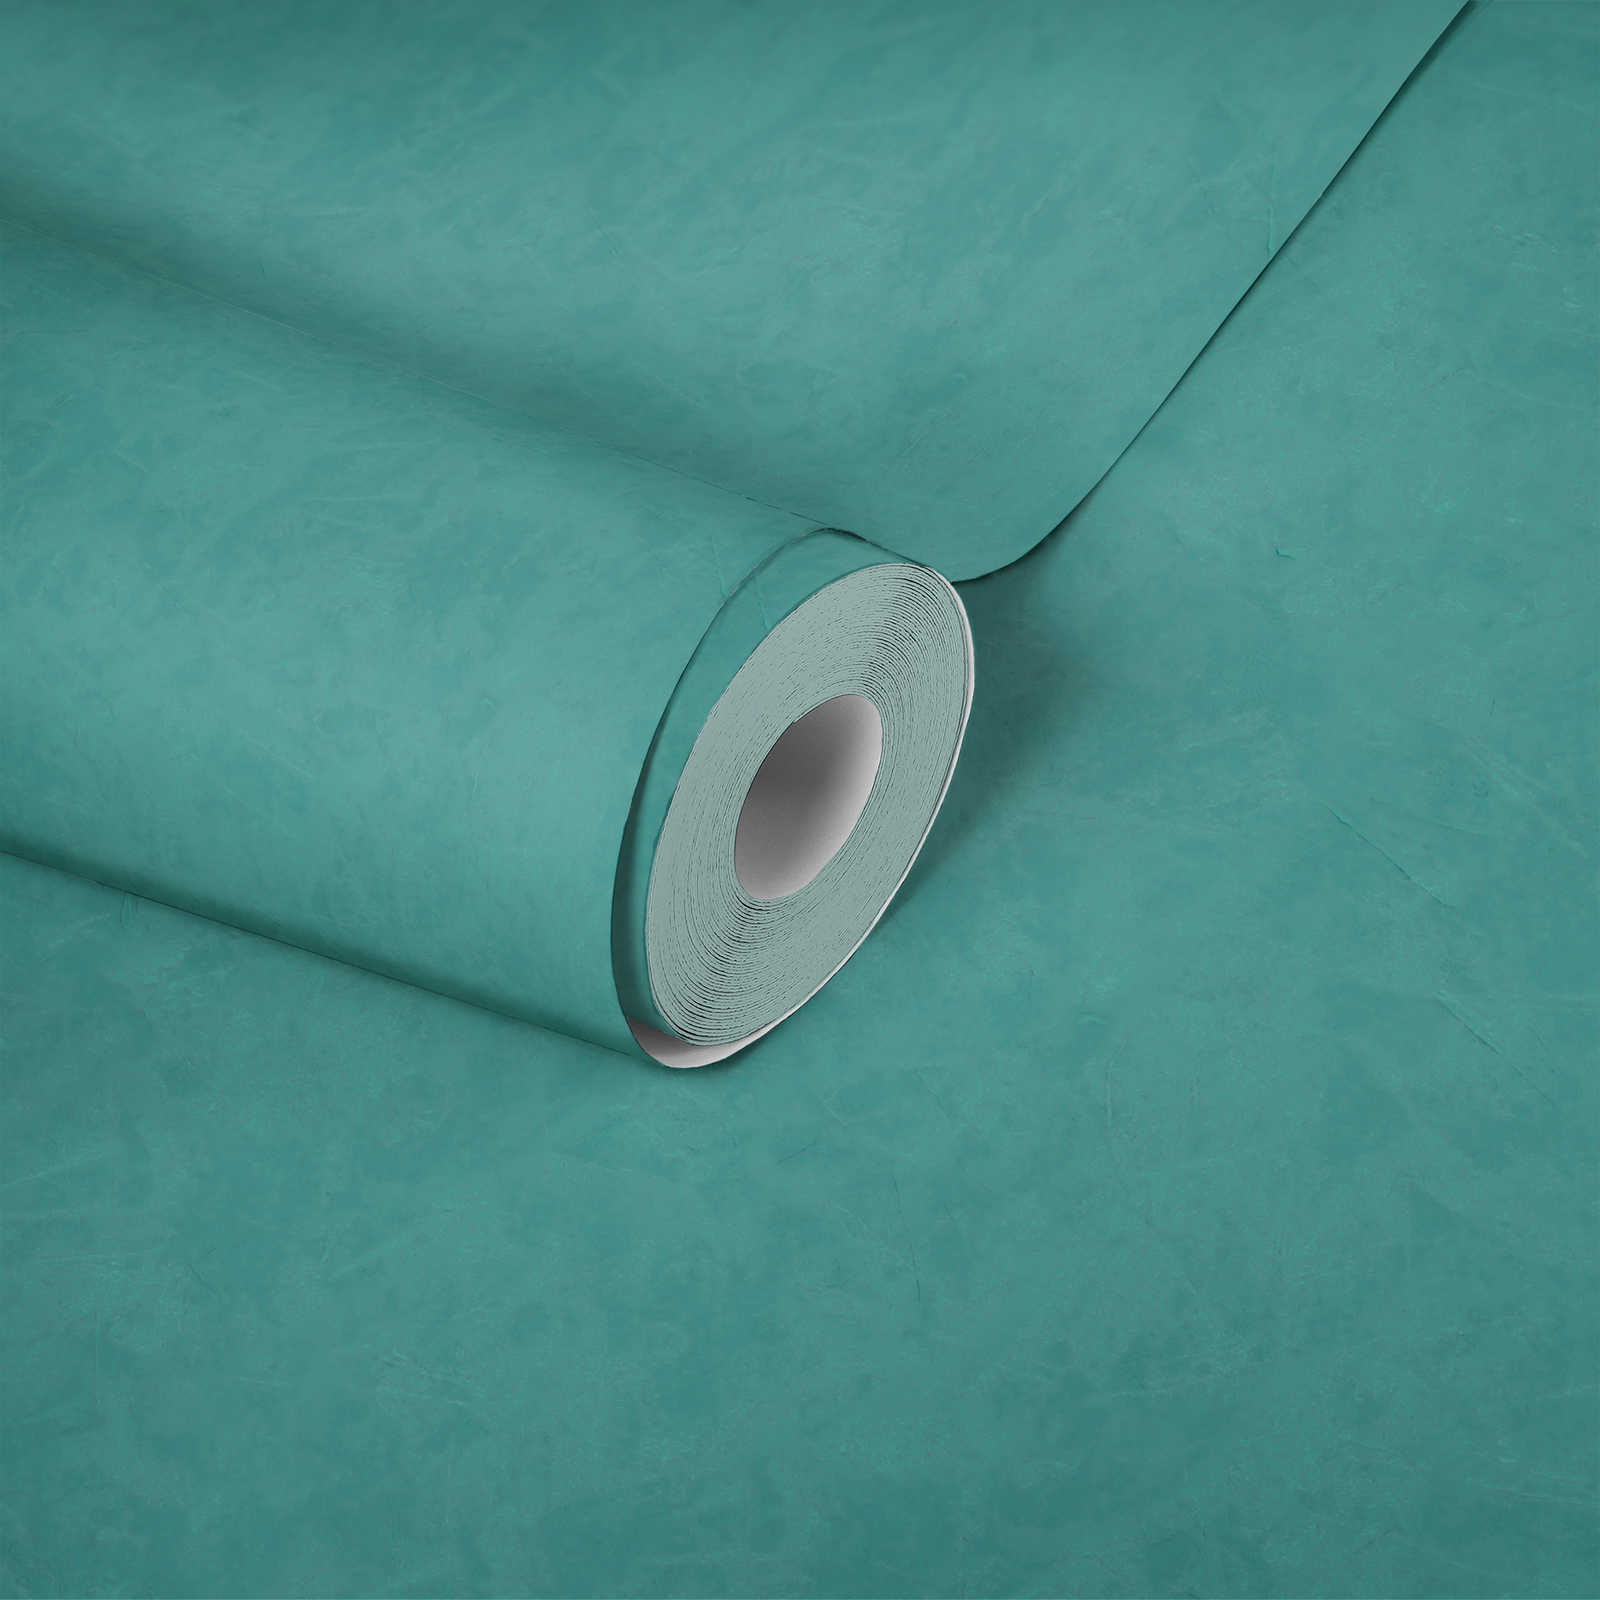             Non-woven wallpaper plaster look & texture pattern - petrol, turquoise
        